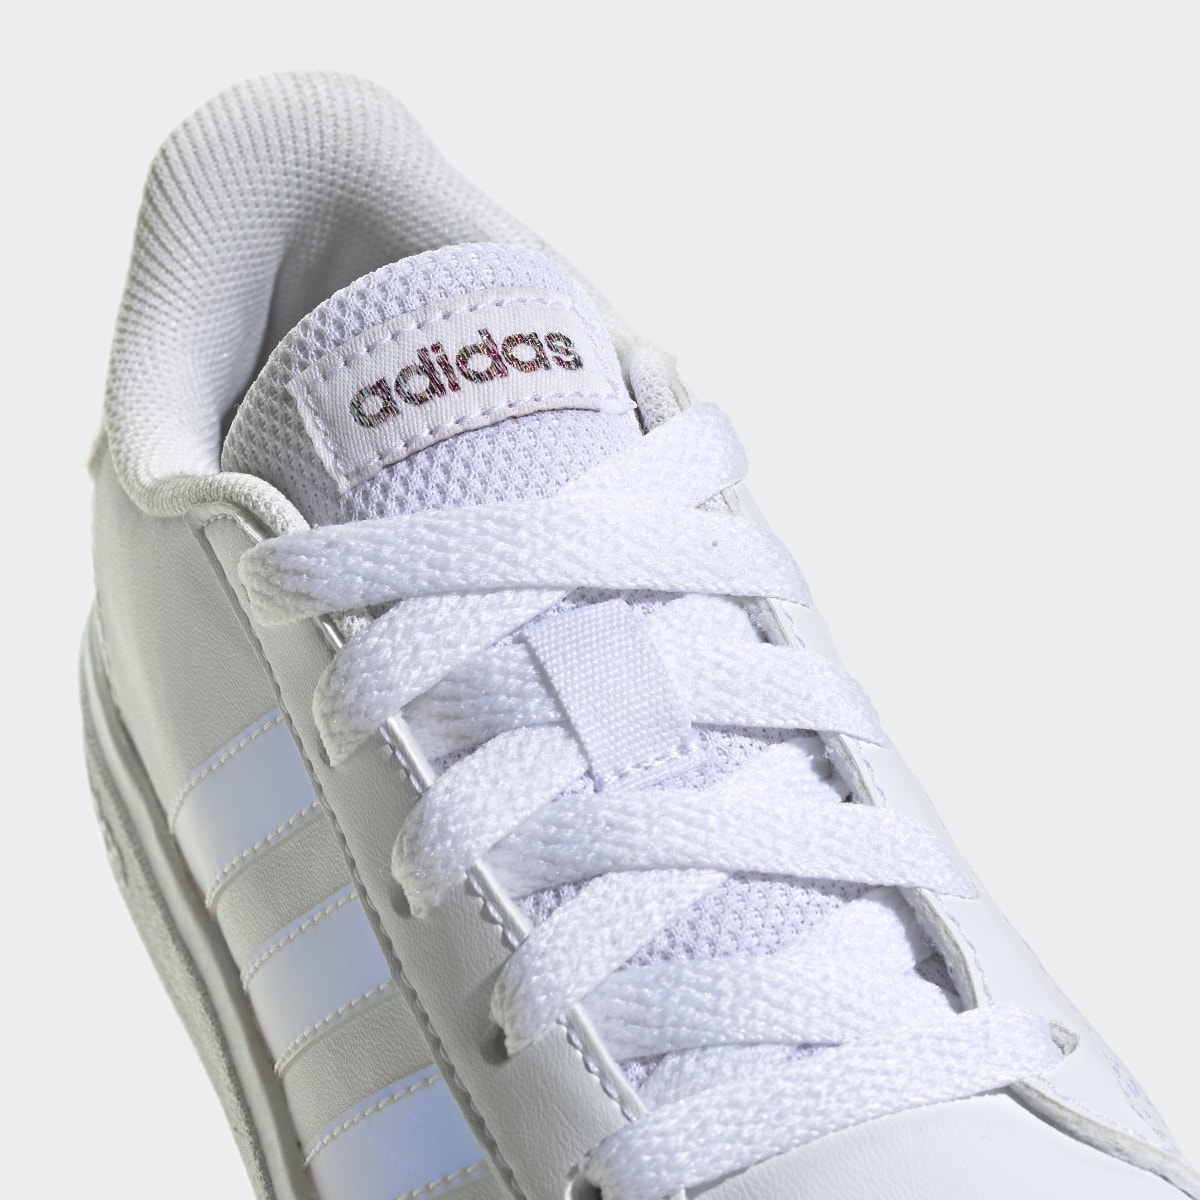 Adidas Grand Court Lifestyle Lace Tennis Schuh. 9